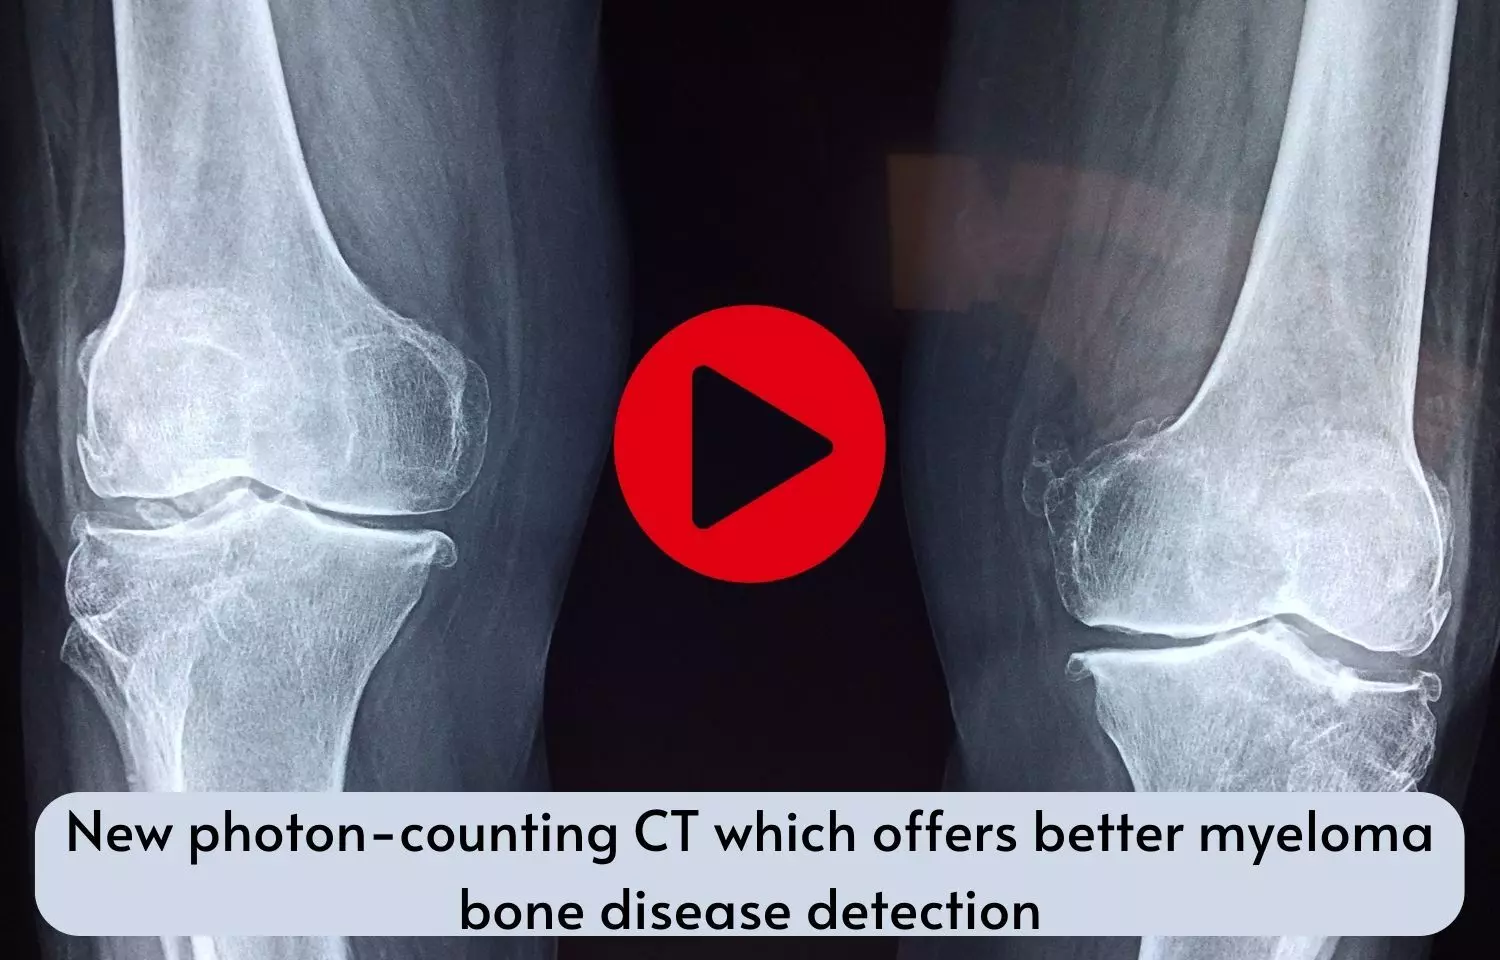 New photon-counting CT which offers better myeloma bone disease detection